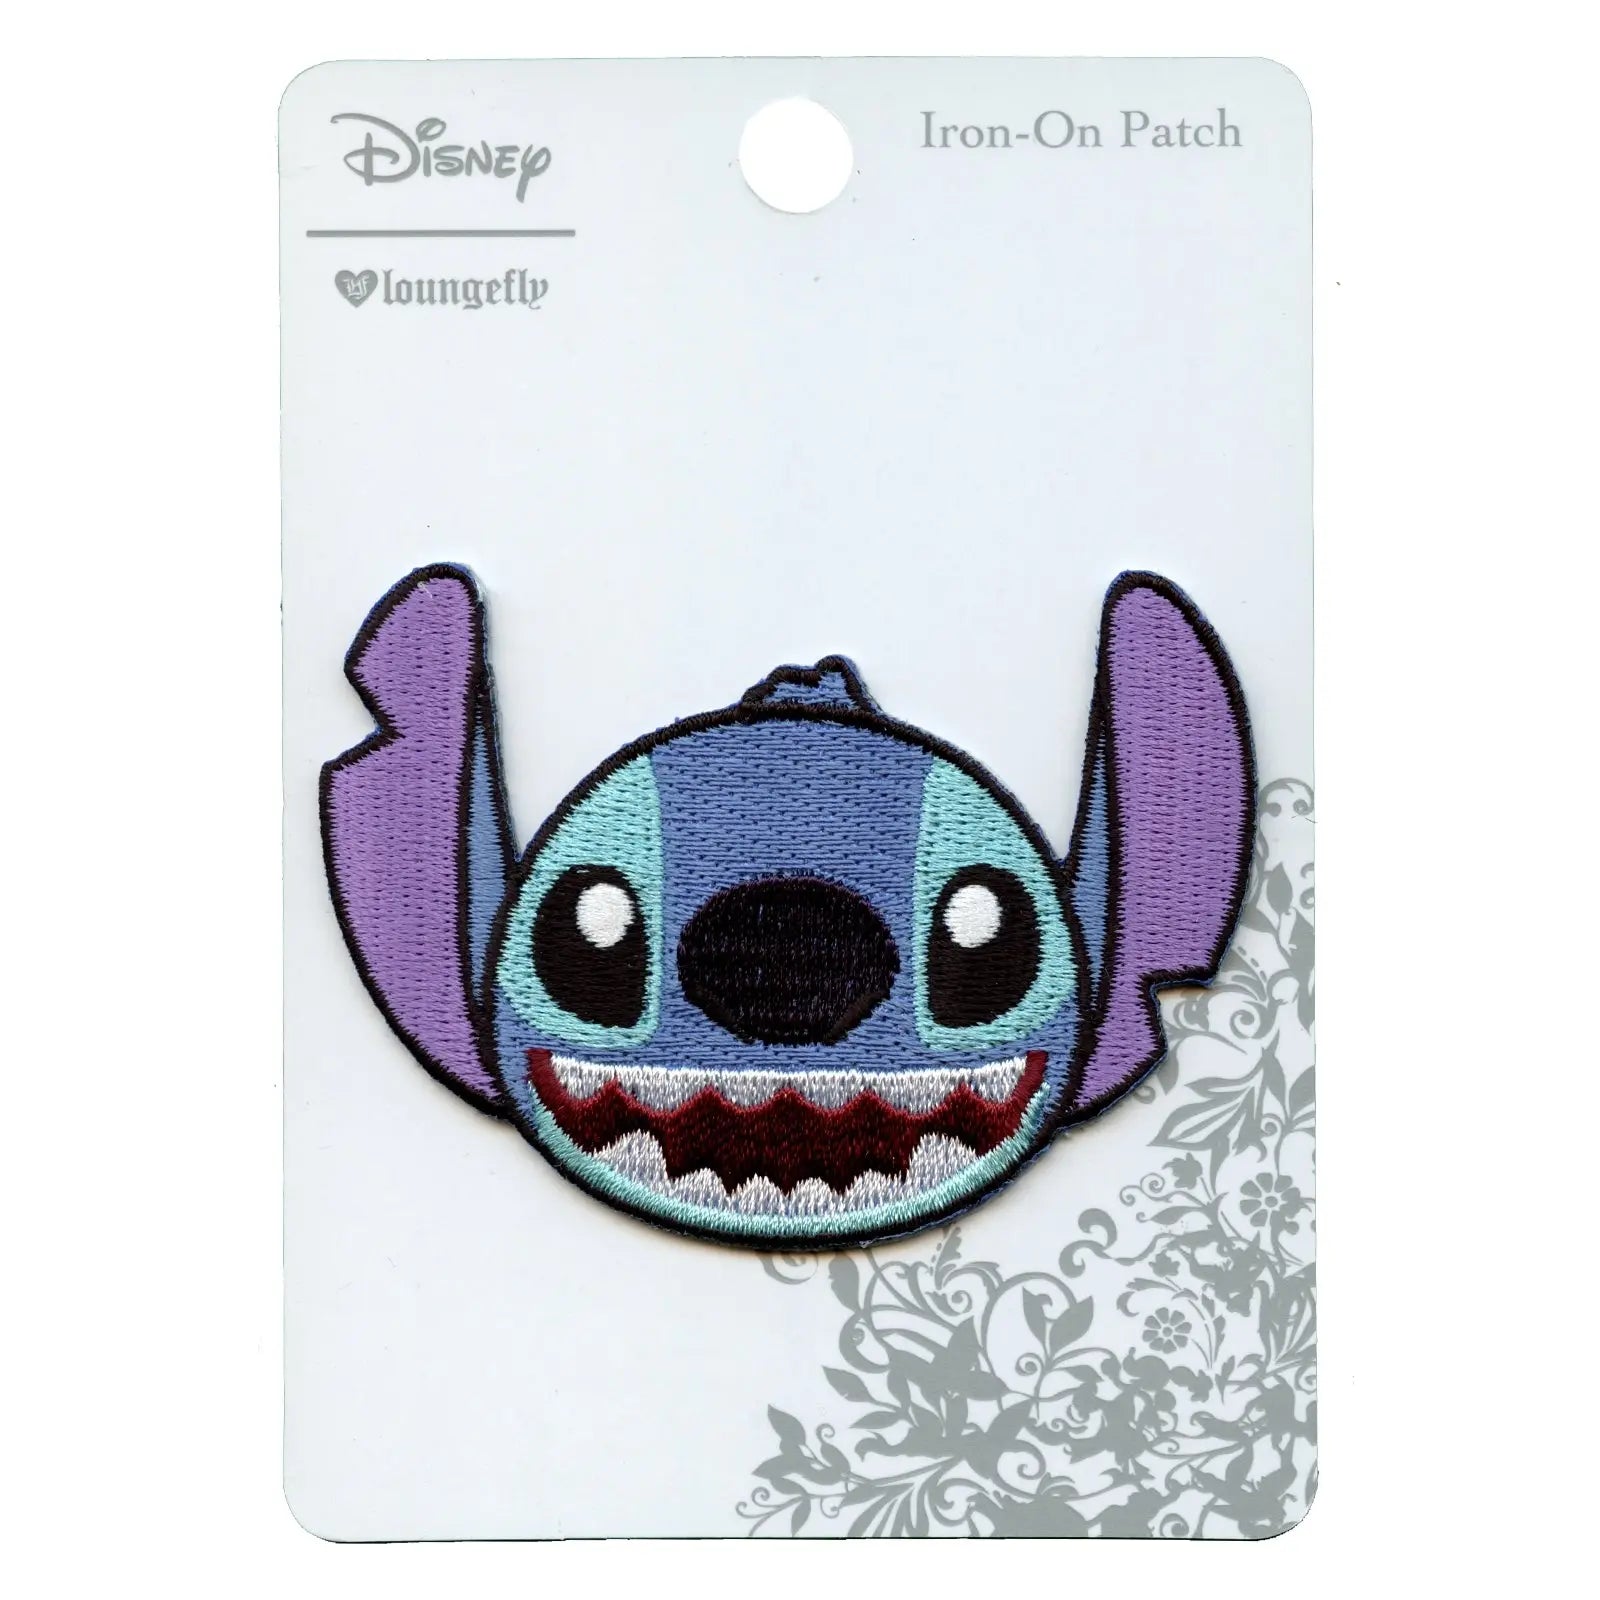 Disney Character Stitch Iron on Patch Kids DIY Apparel Embroidery Craft Applique